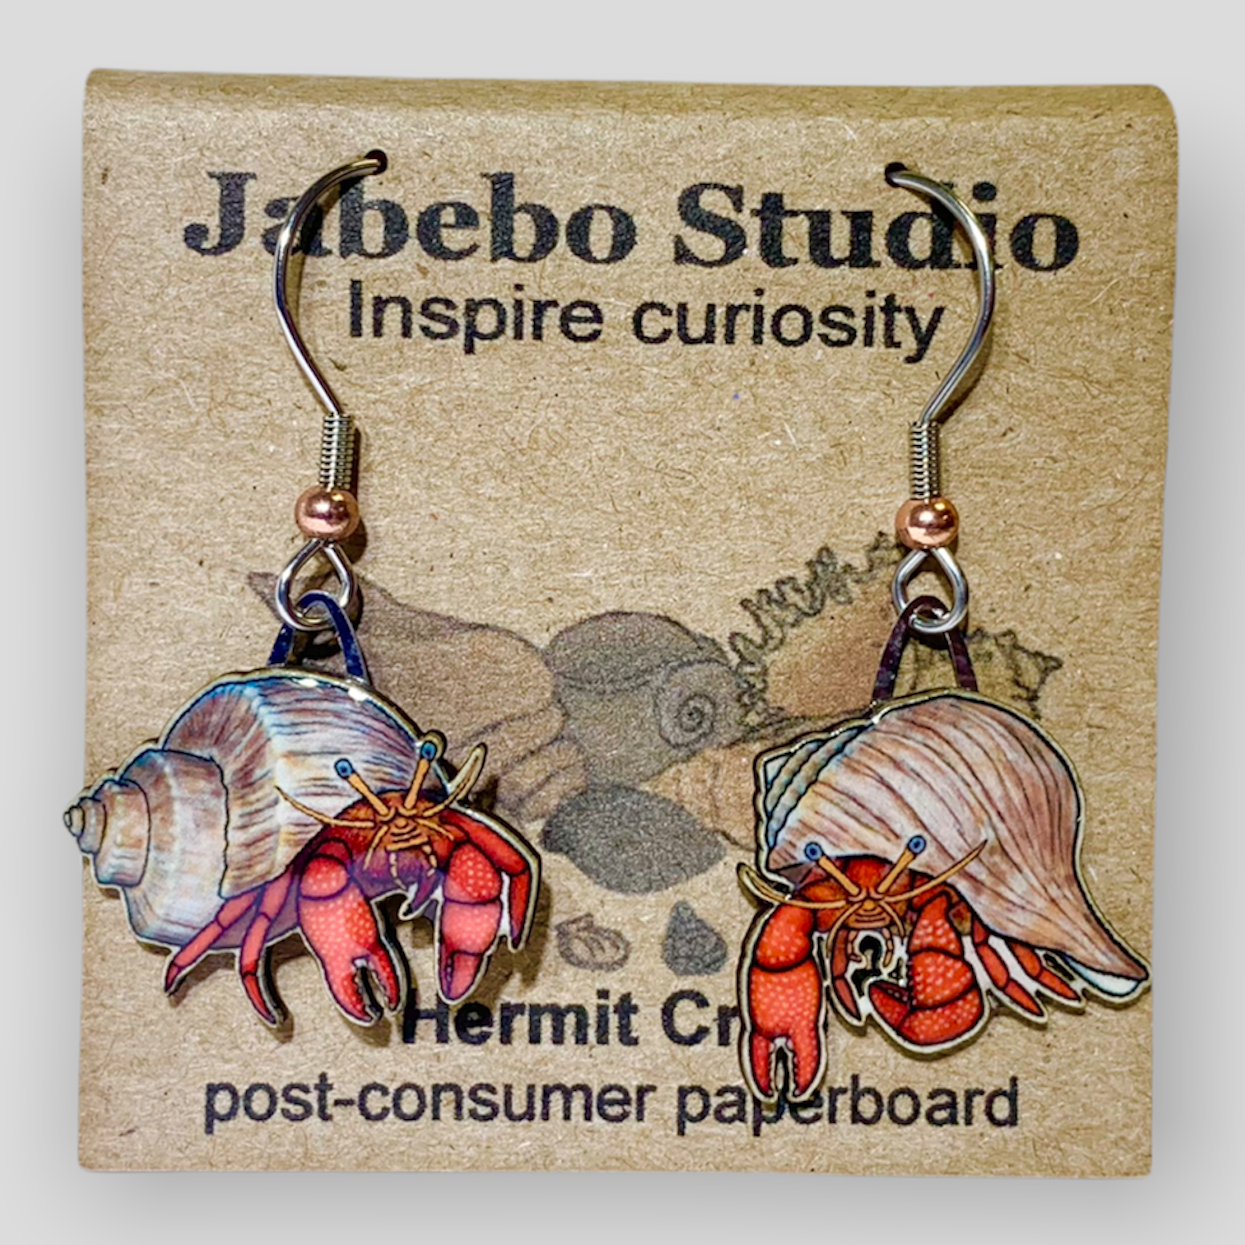 Picture shown is of 1 inch tall pair of earrings of the marine animal the Hermit Crab.